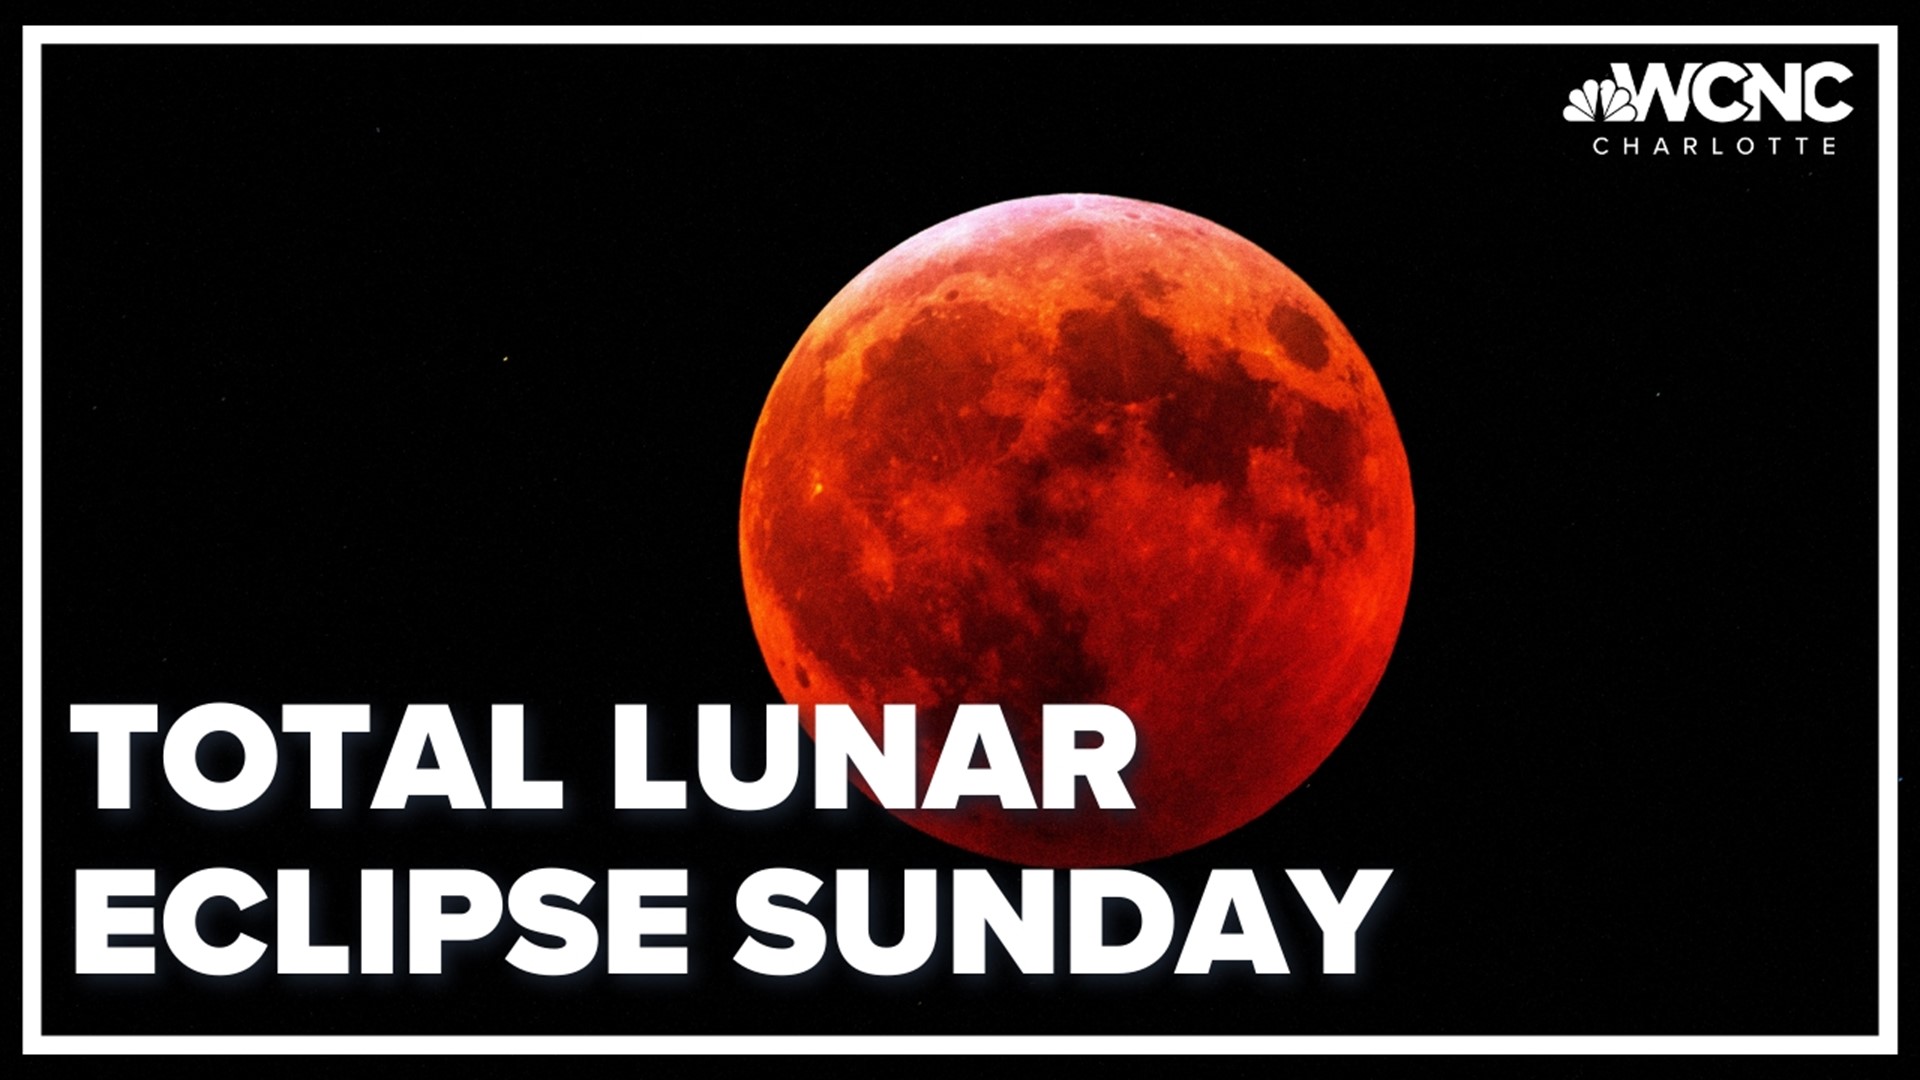 Sunday's lunar eclipse will occur when the moon is full and aligned to turn red.